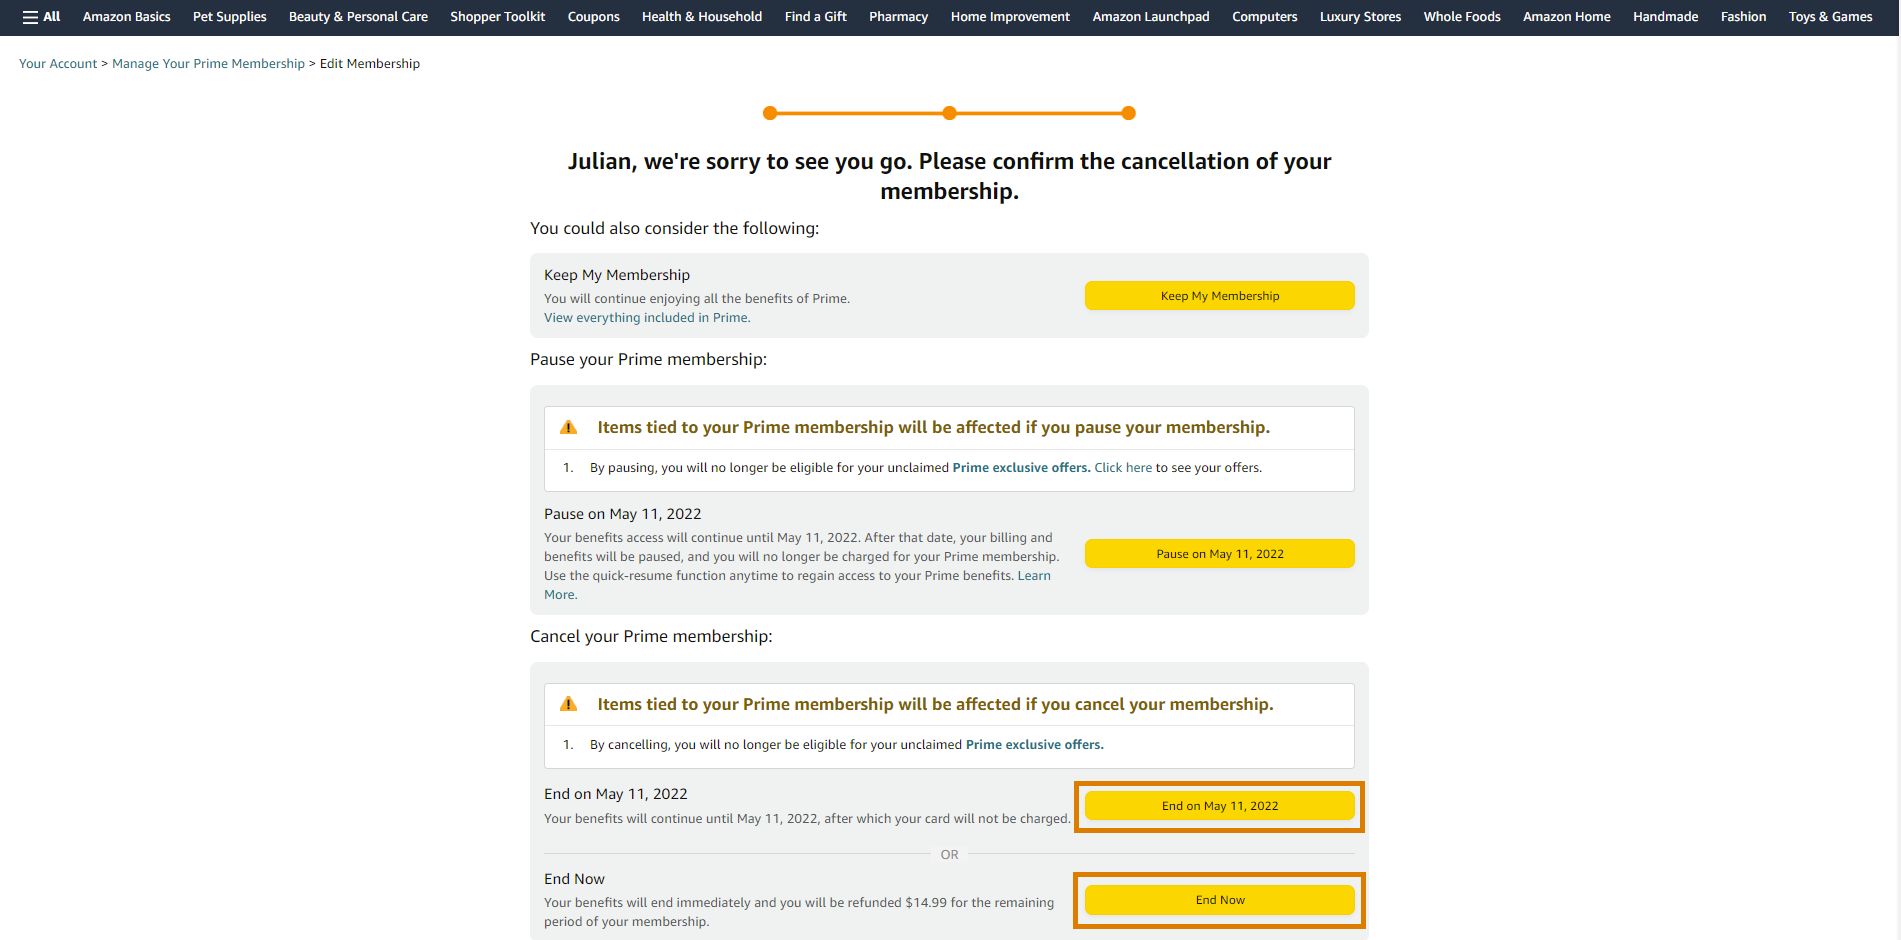 amazon prime 3rd cancelation confirmation page with the end on xxx date and end now buttons highlighted